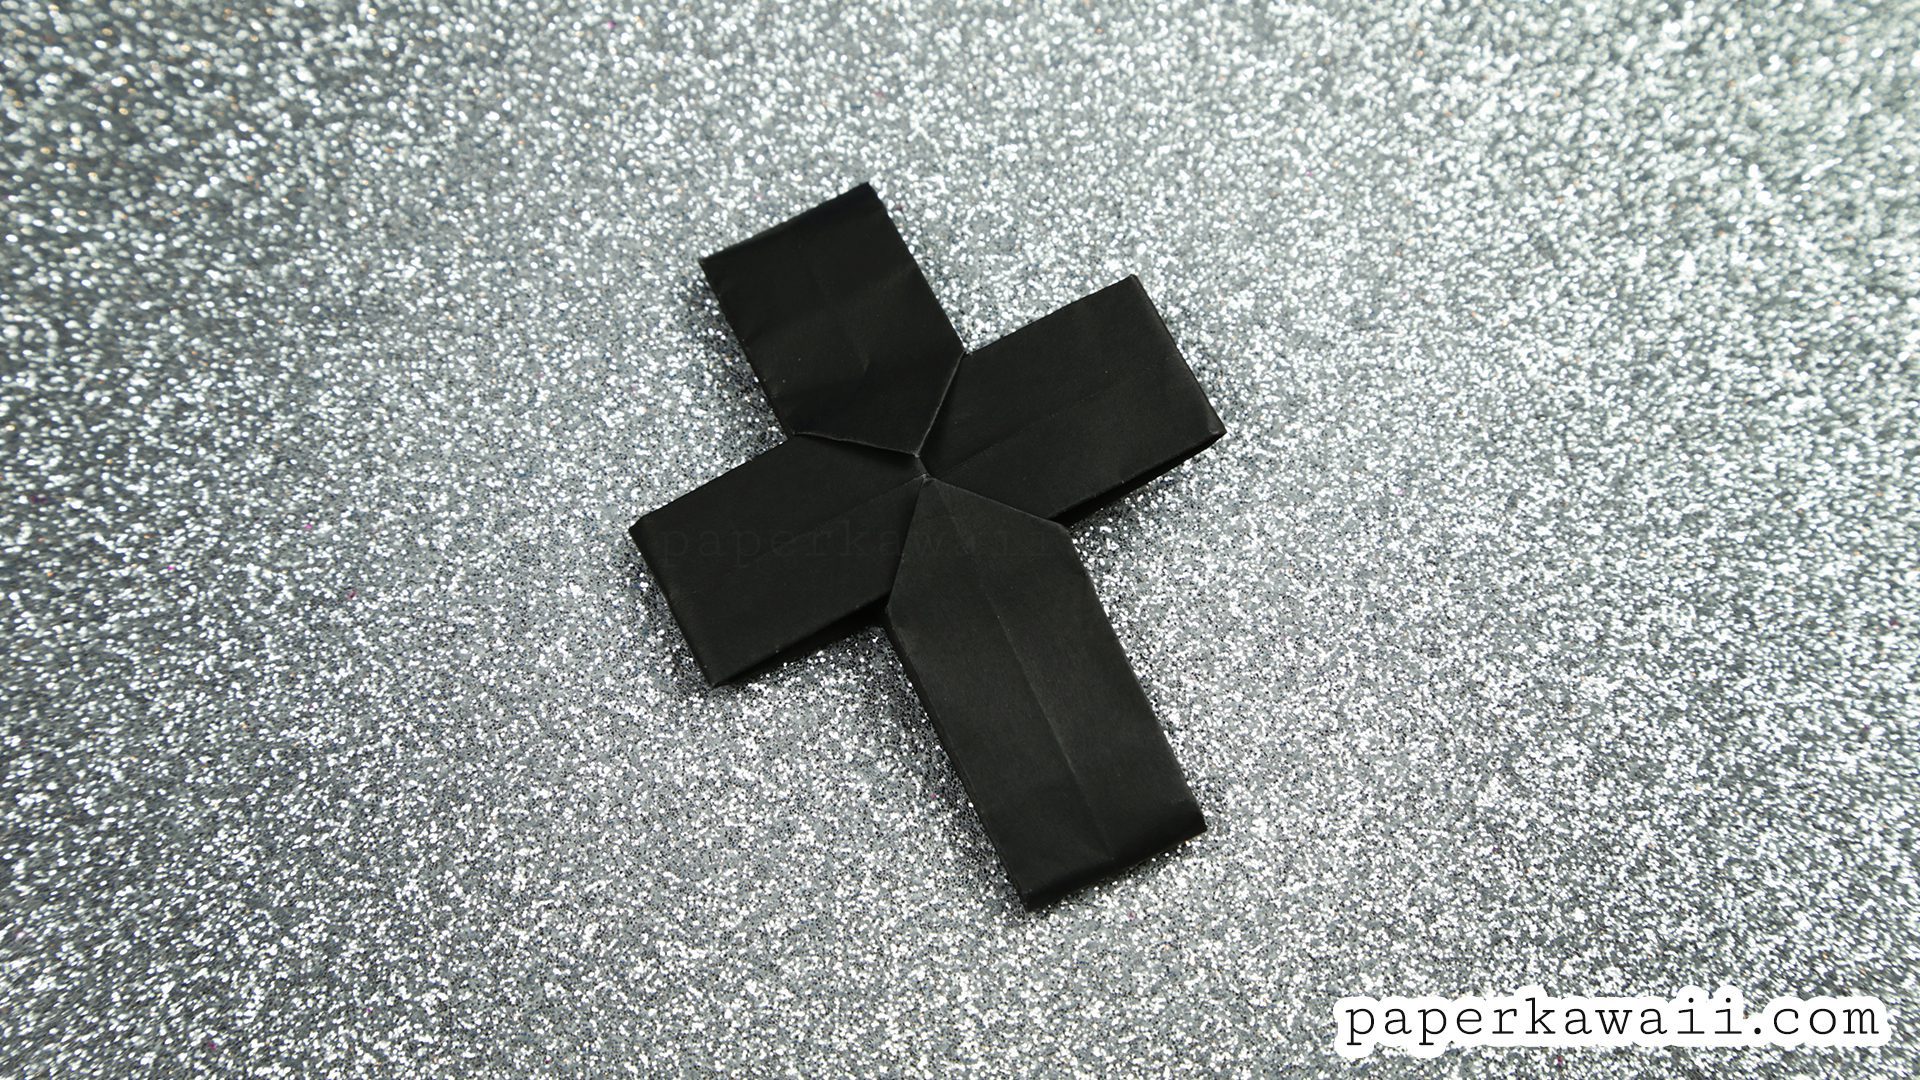 How to Make an Origami Cross!